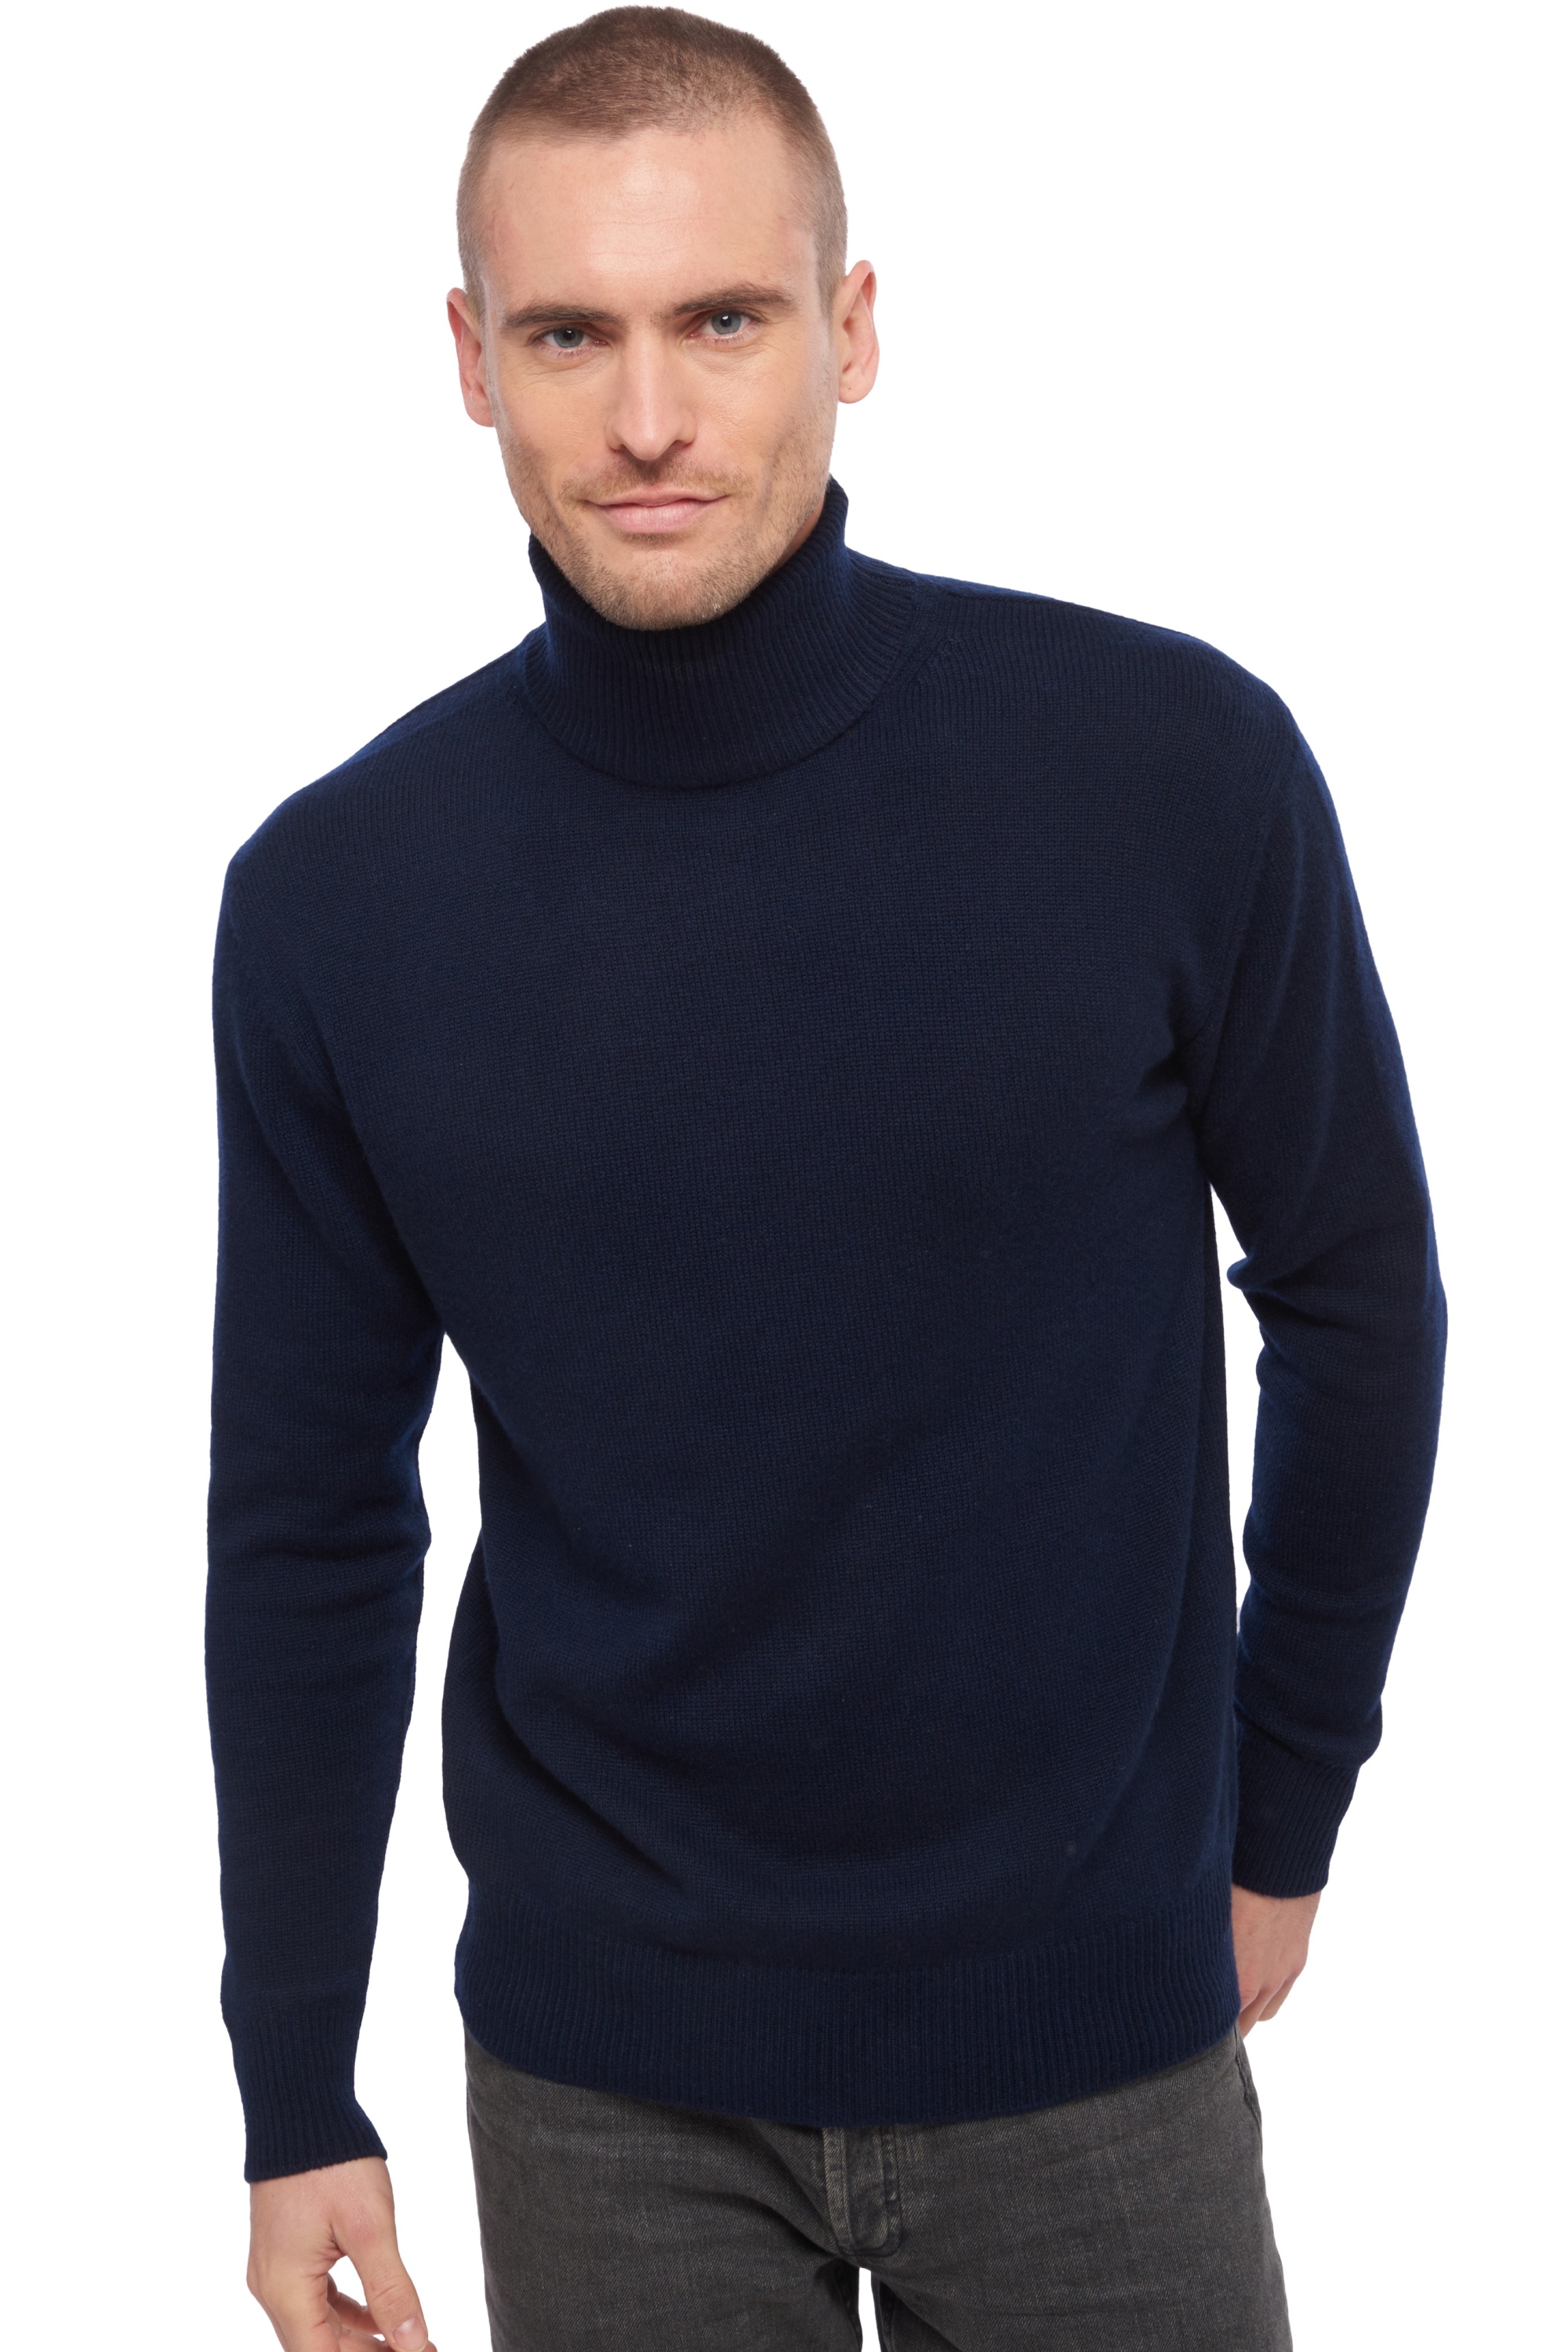 Cachemire pull homme col roule edgar 4f marine fonce 2xl